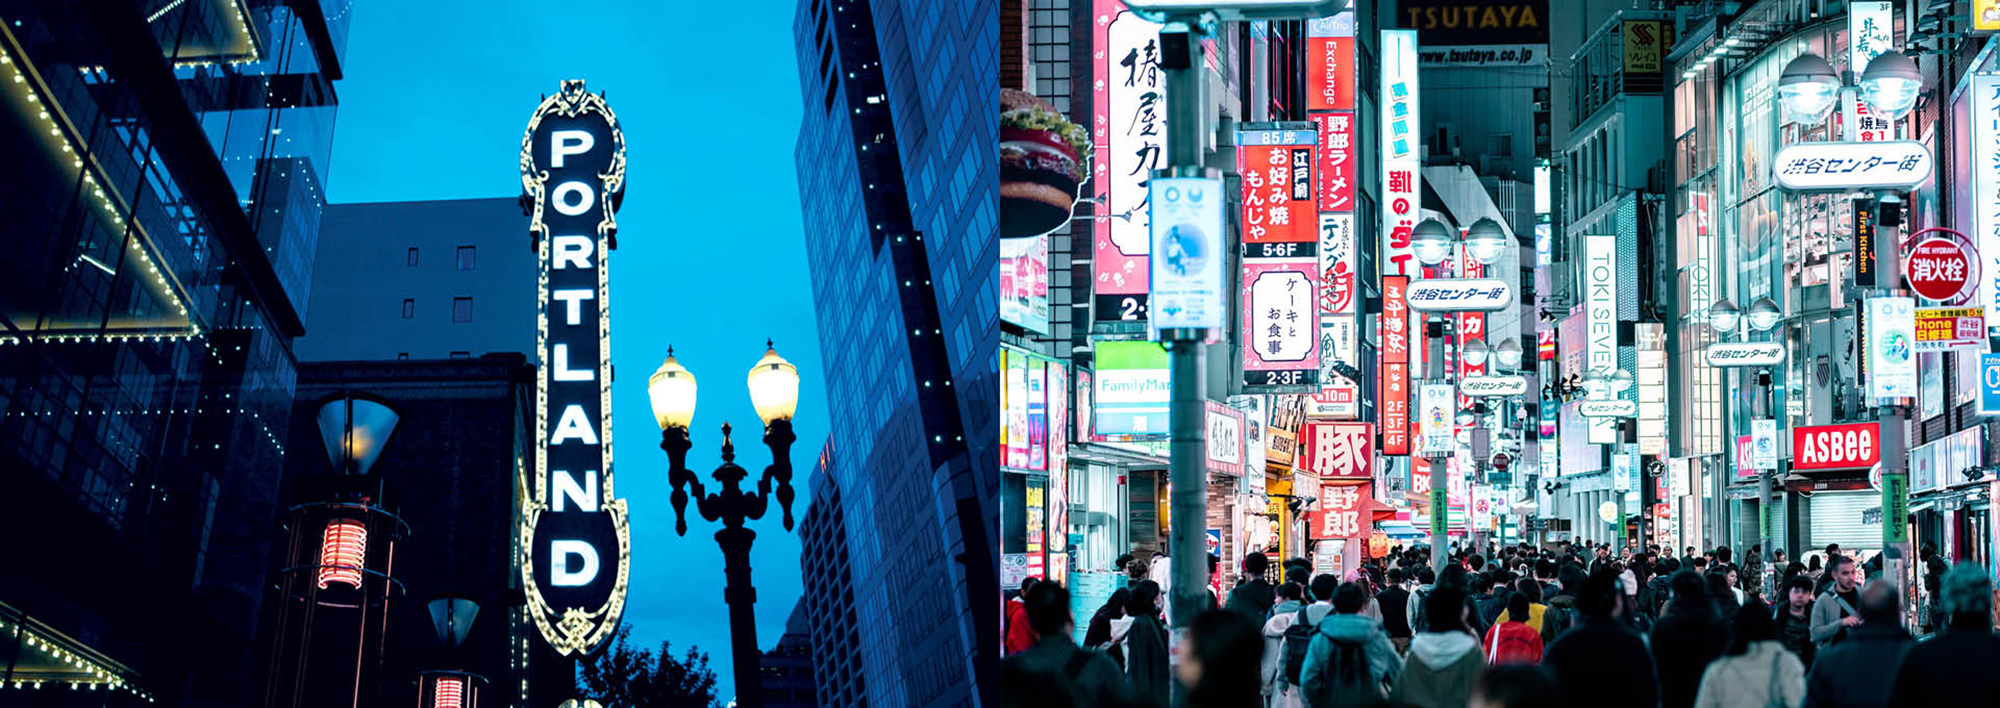 photos of downtown Portland and Tokyo side by side to create one image.